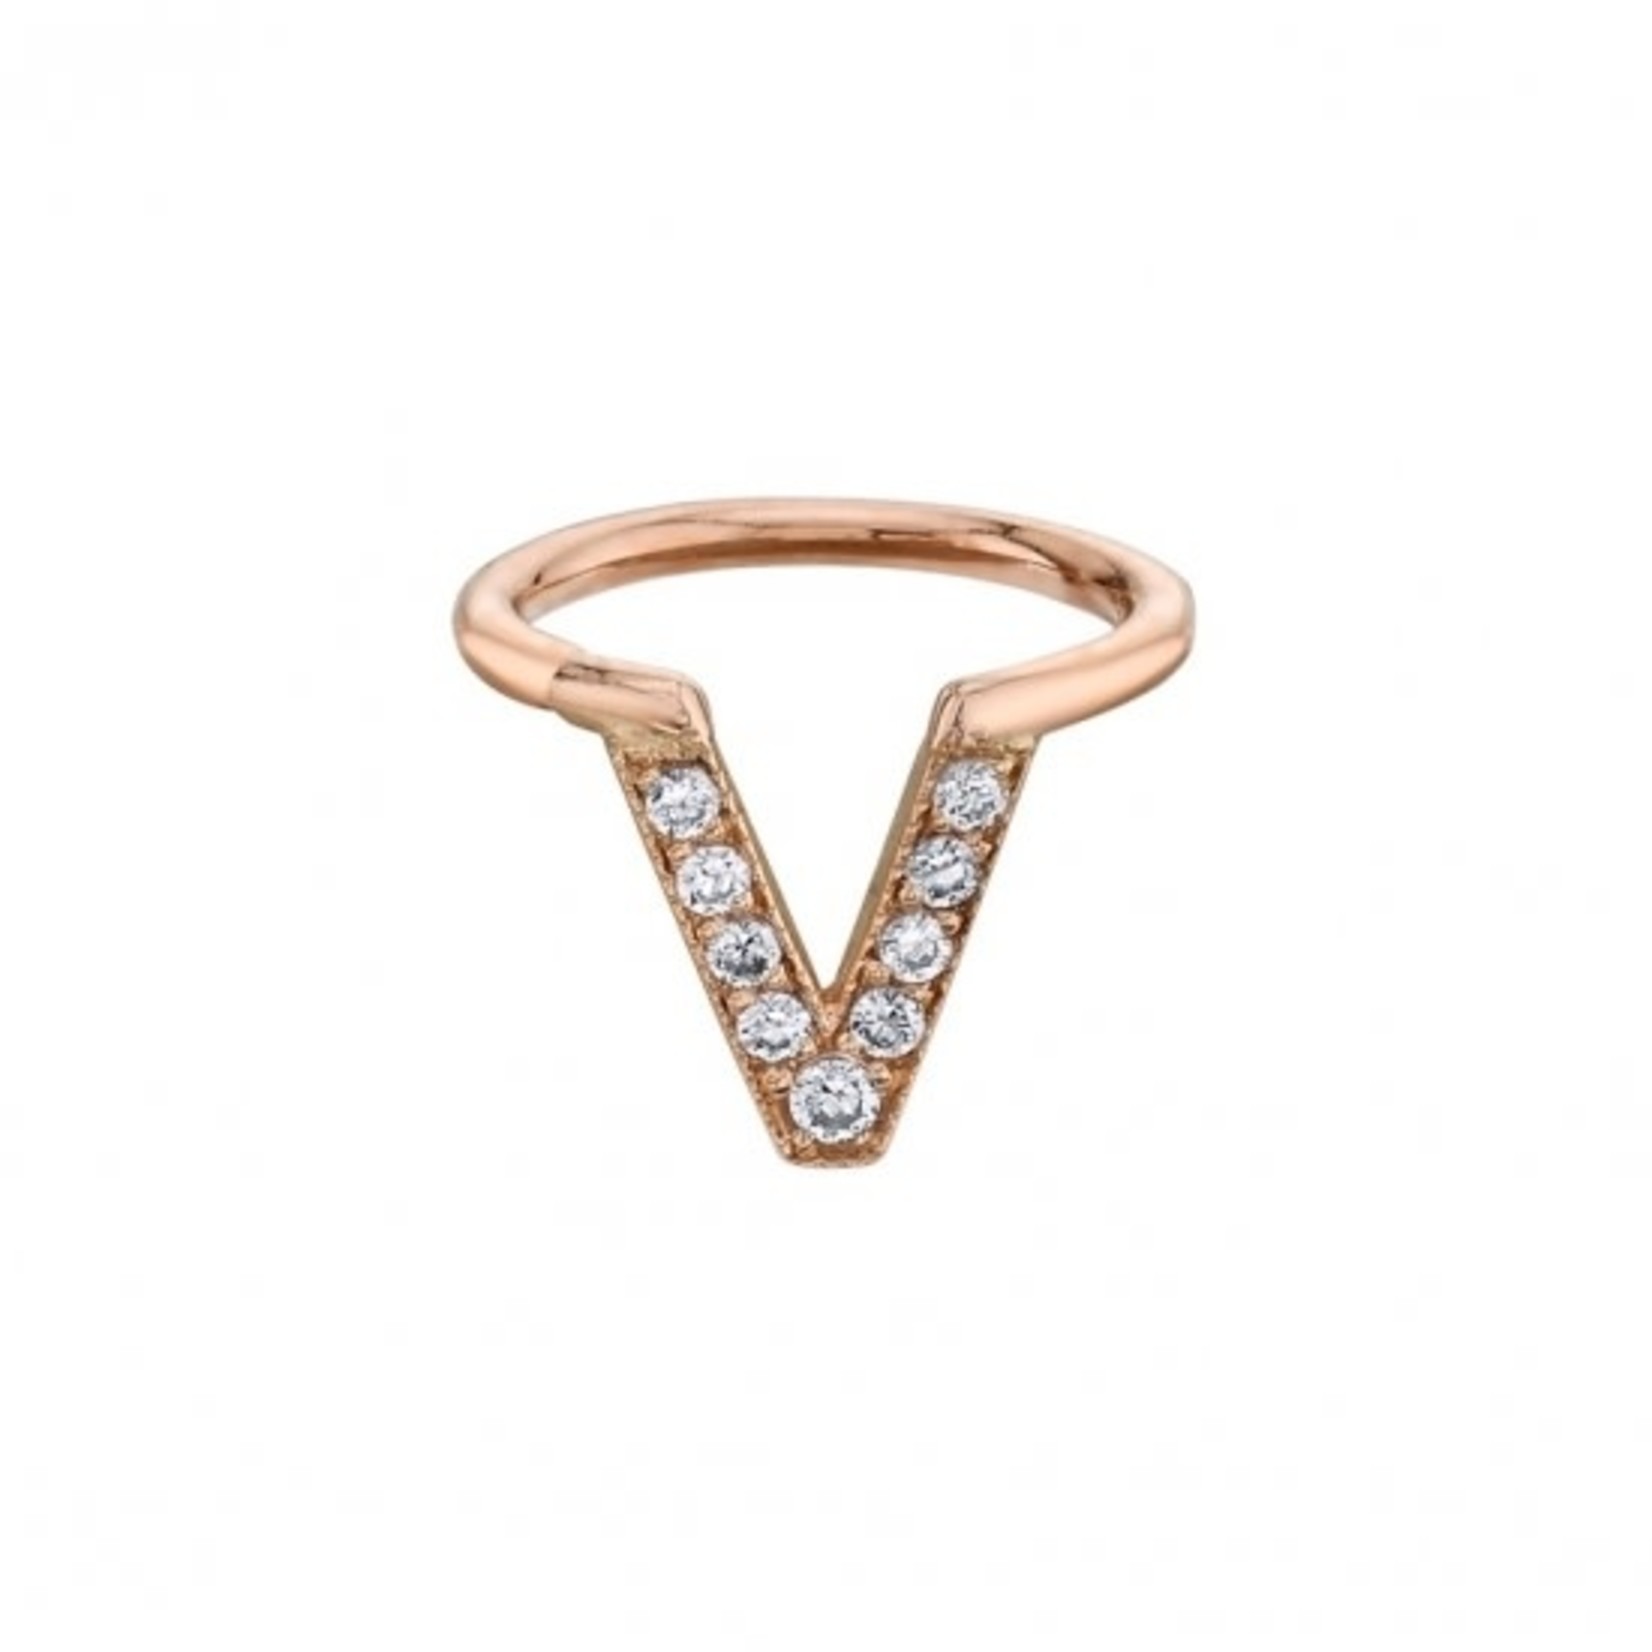 BVLA BVLA 16g "Jennelle V" seam ring with 8x 1.0 CZ and 1x 1.25 CZ